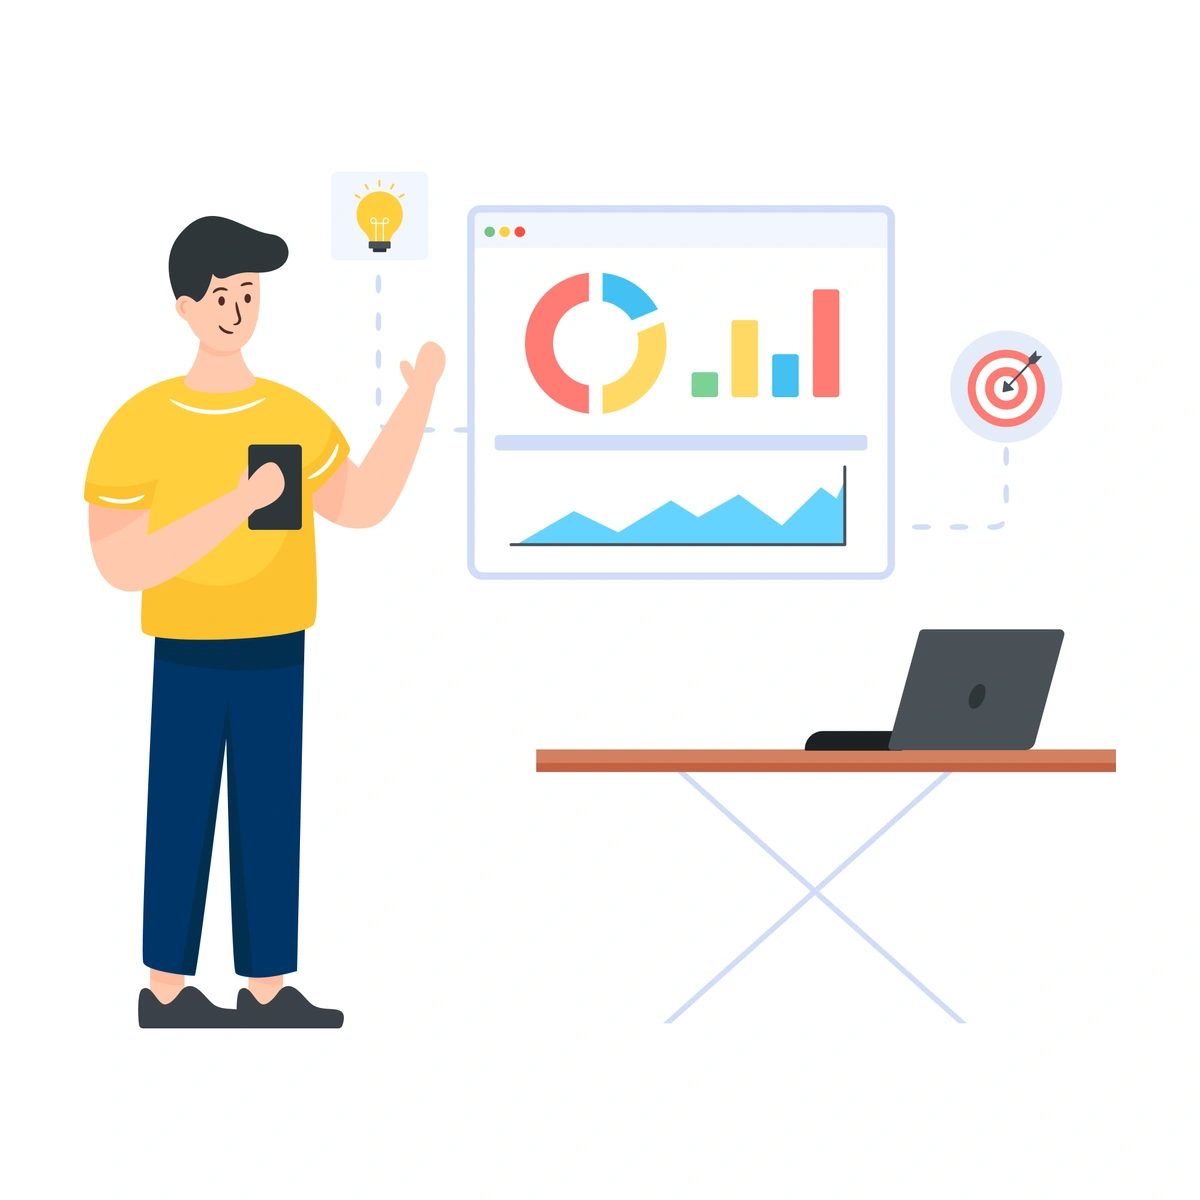 A flat design illustration of a man standing next to a desk with a laptop. Above the laptop, there are floating graphics of charts and a target, symbolizing business strategy, goals, or data analysis.